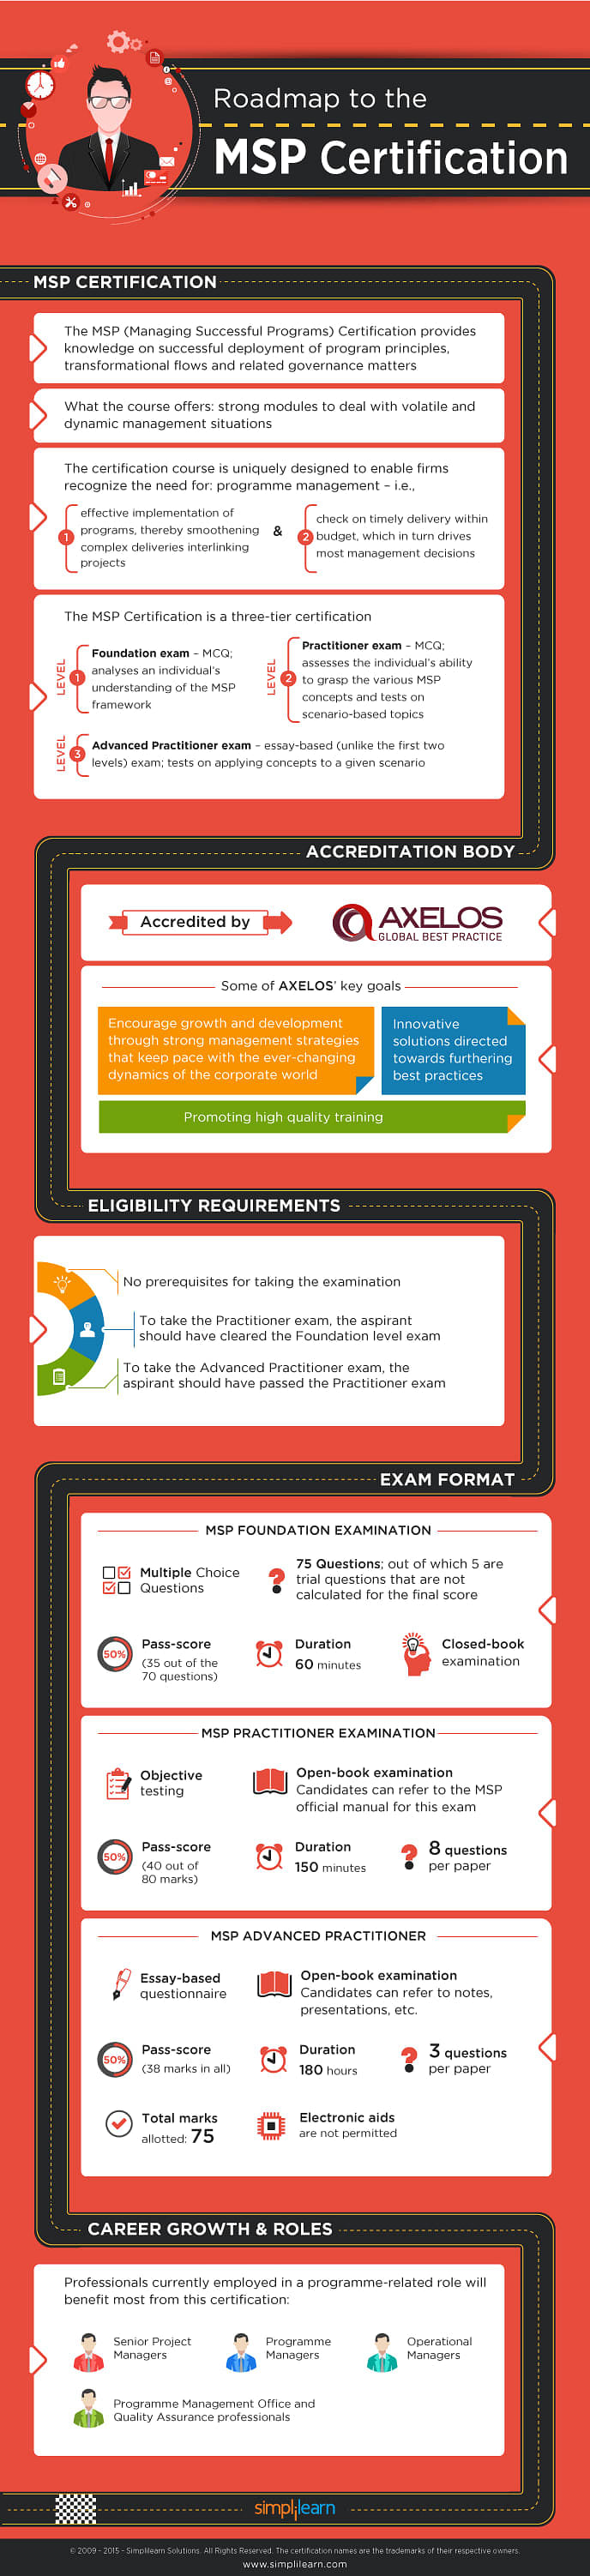 Roadmap to the MSP certification Infographic